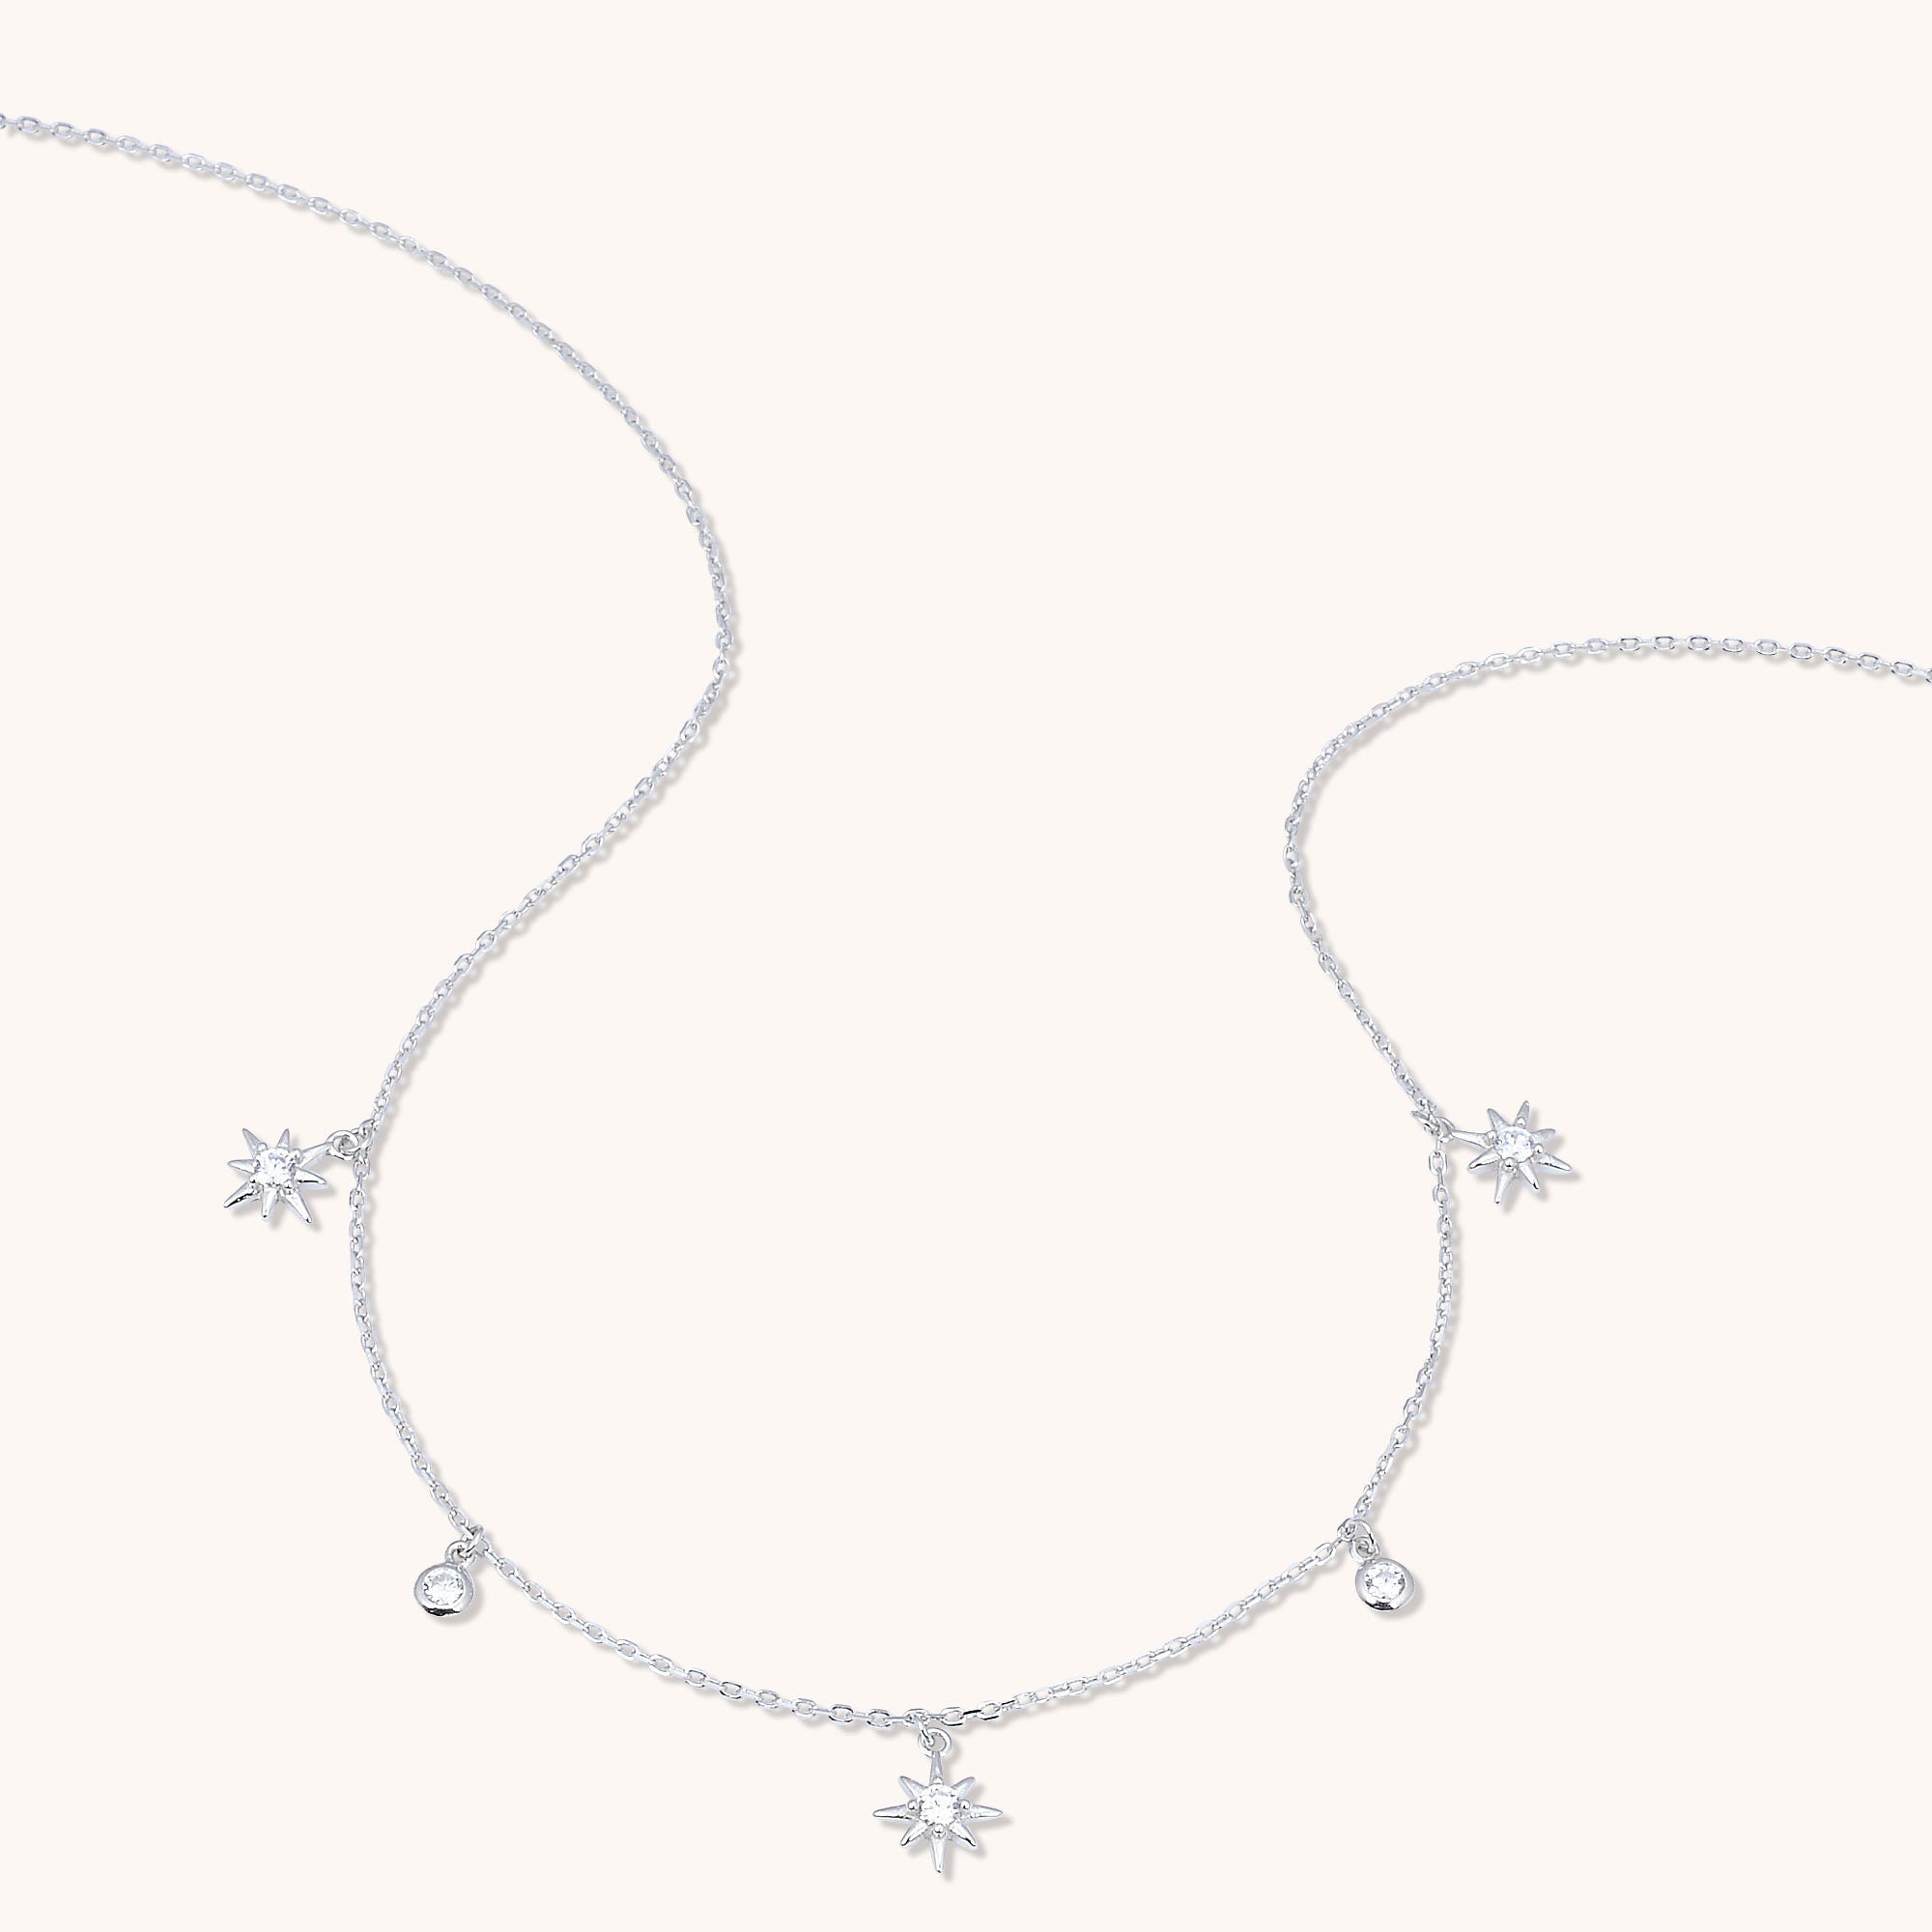 North Star Dangling Necklace Silver